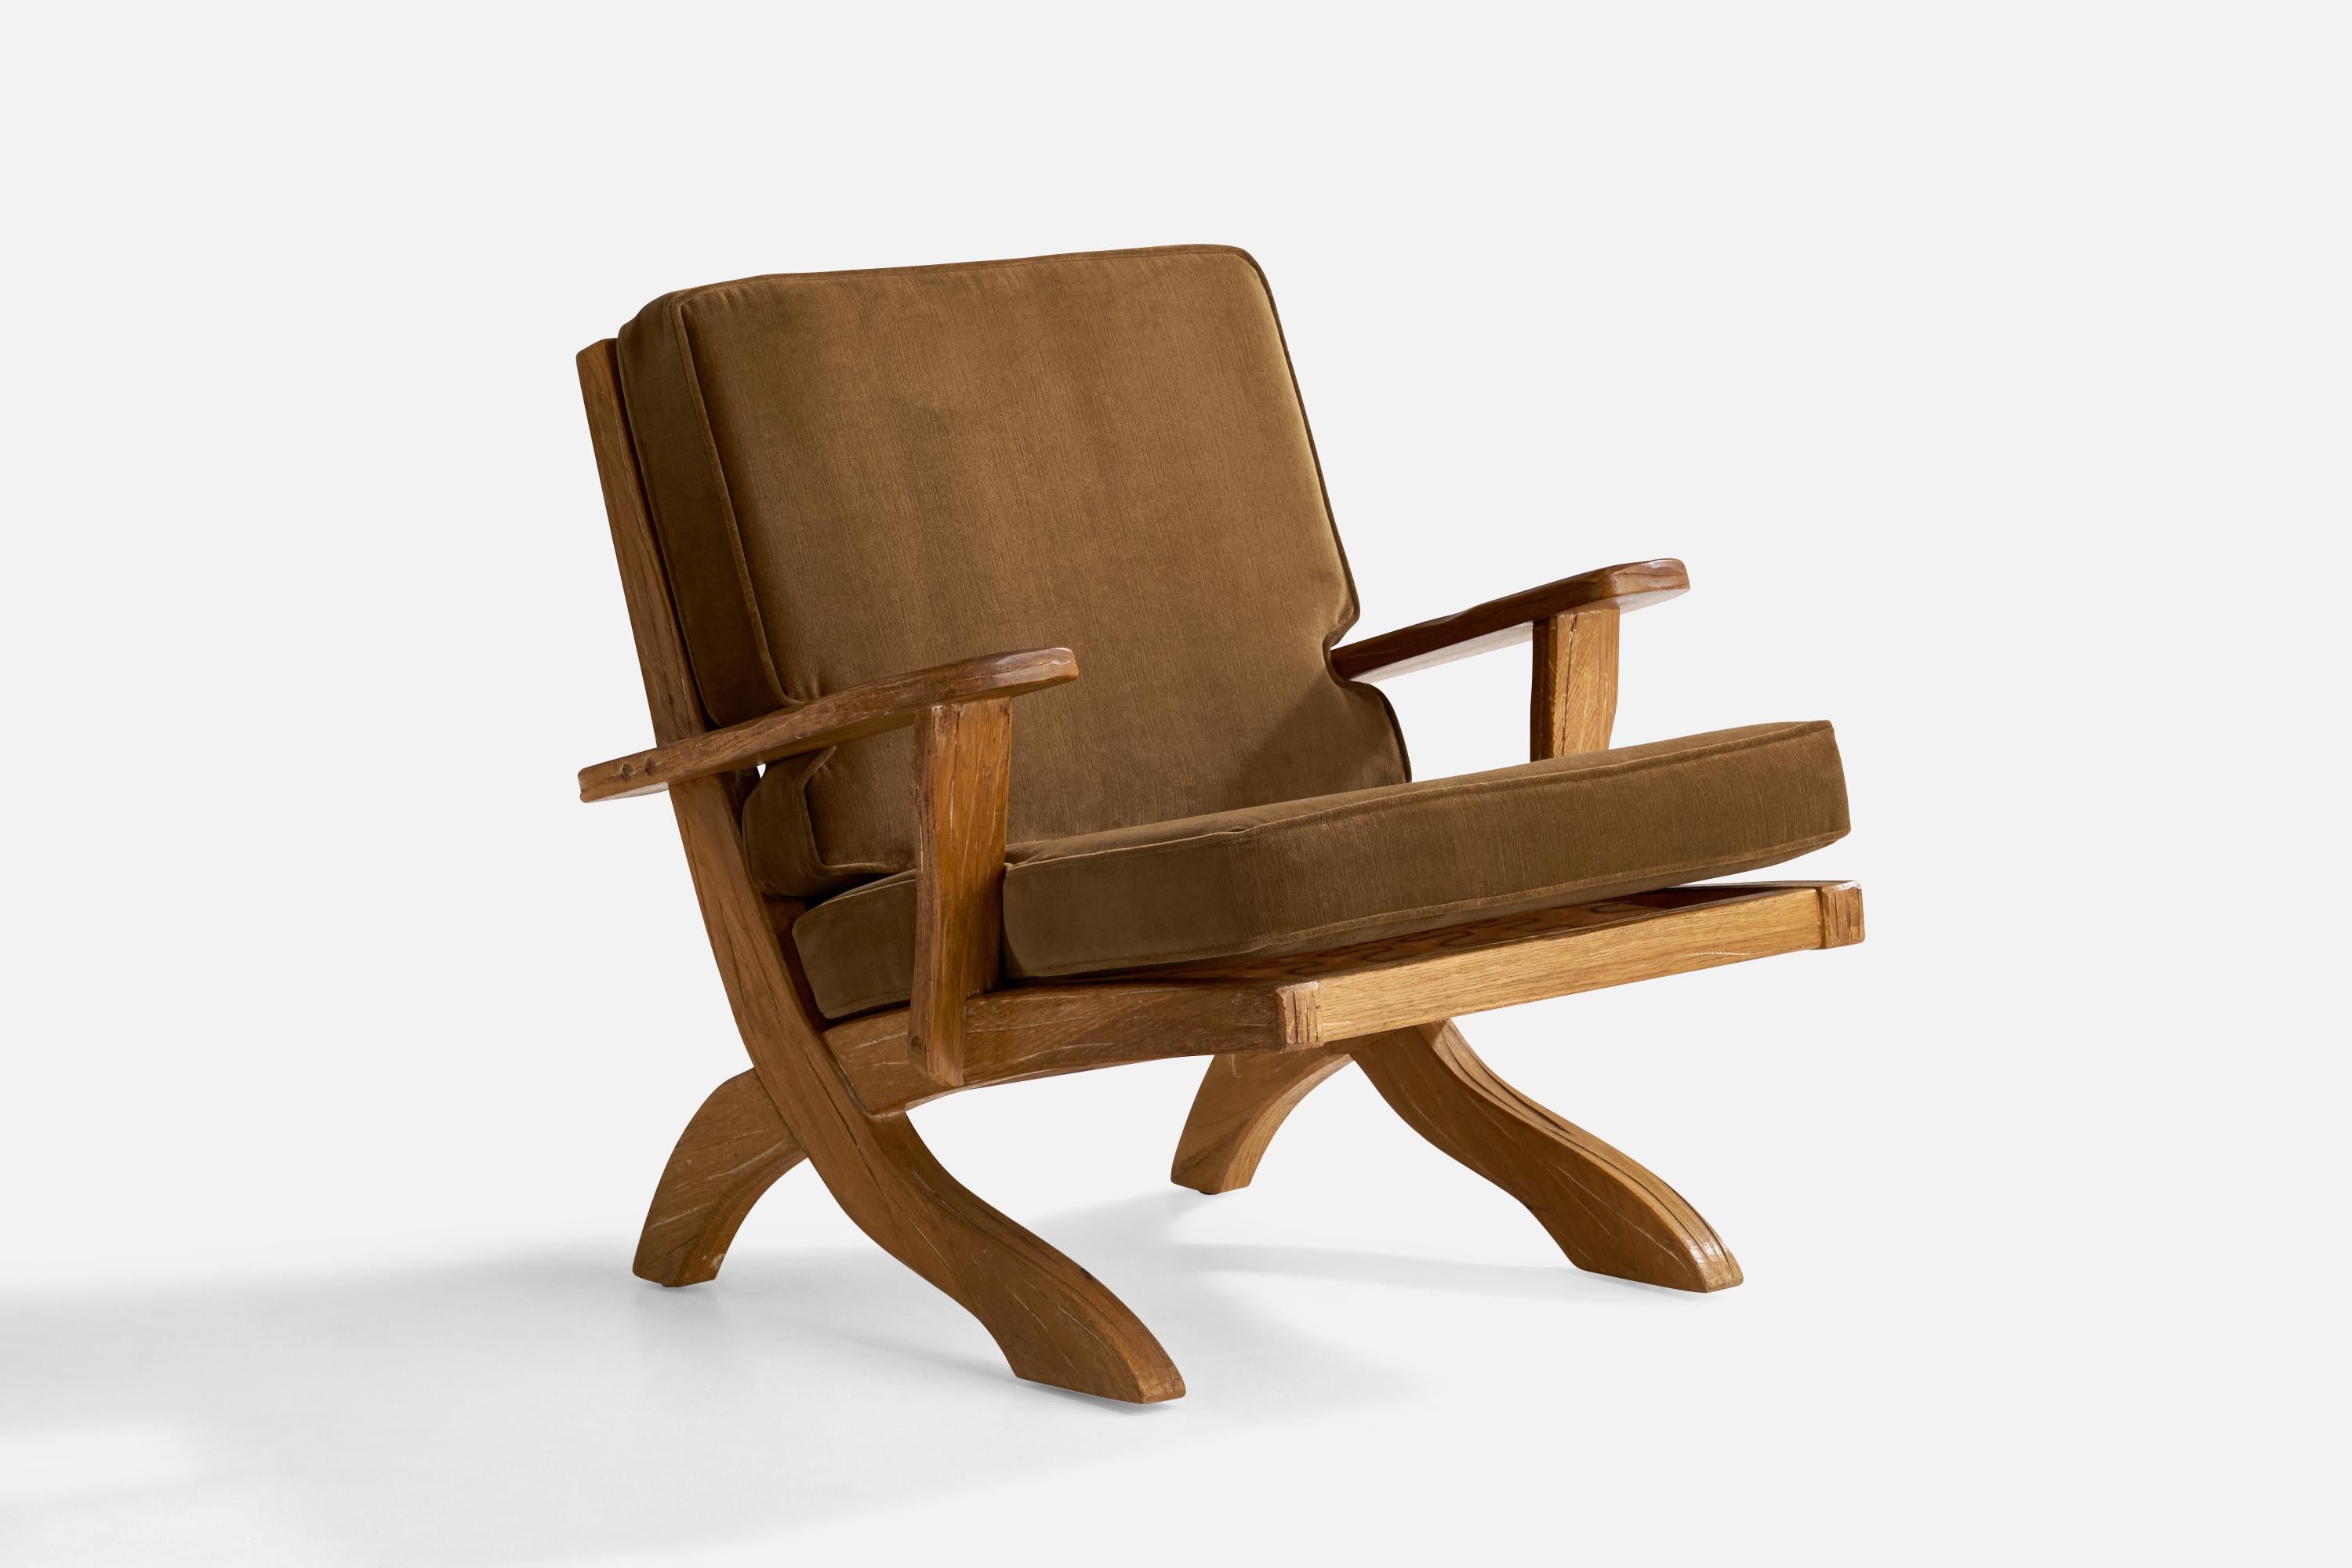 An oak and brown velvet lounge chair designed and produced by A. Brandt Ranch Oak, USA, 1950s.

Seat height: 17.75